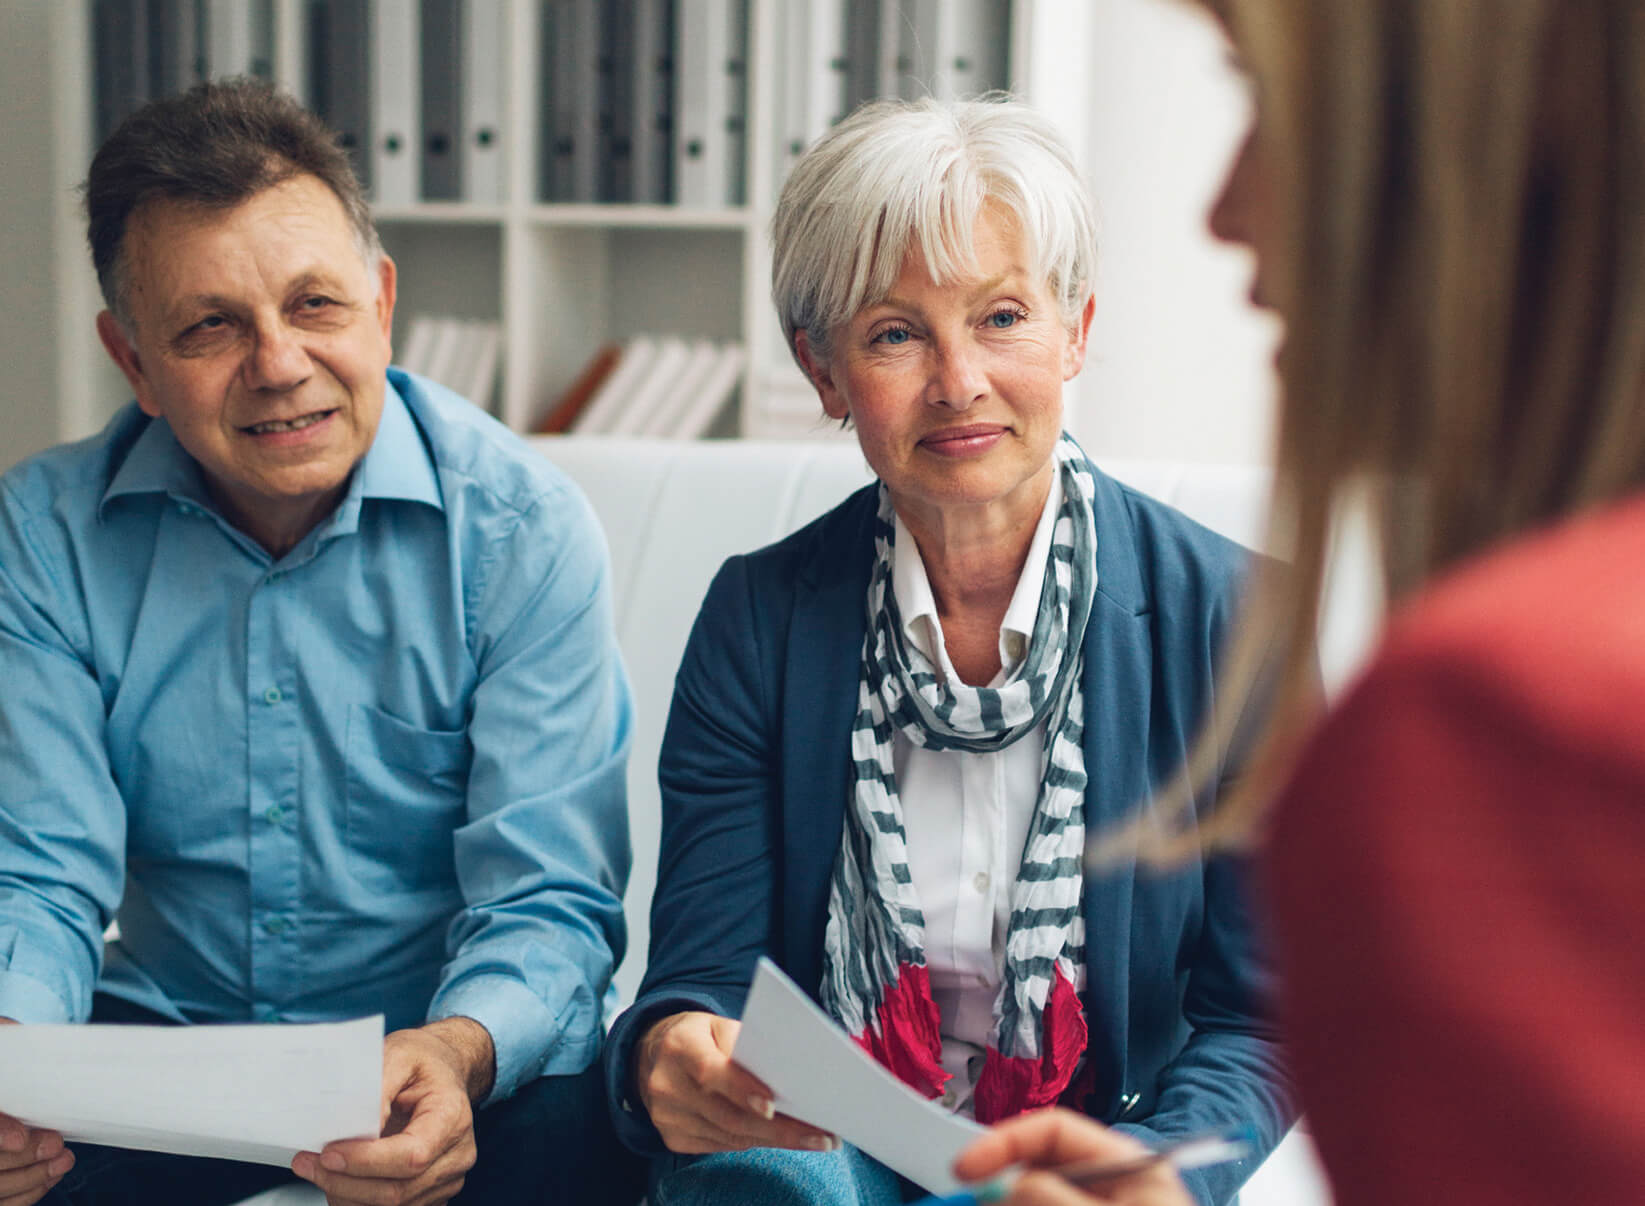 Taking up a power of attorney for/or financially assisting an older relative